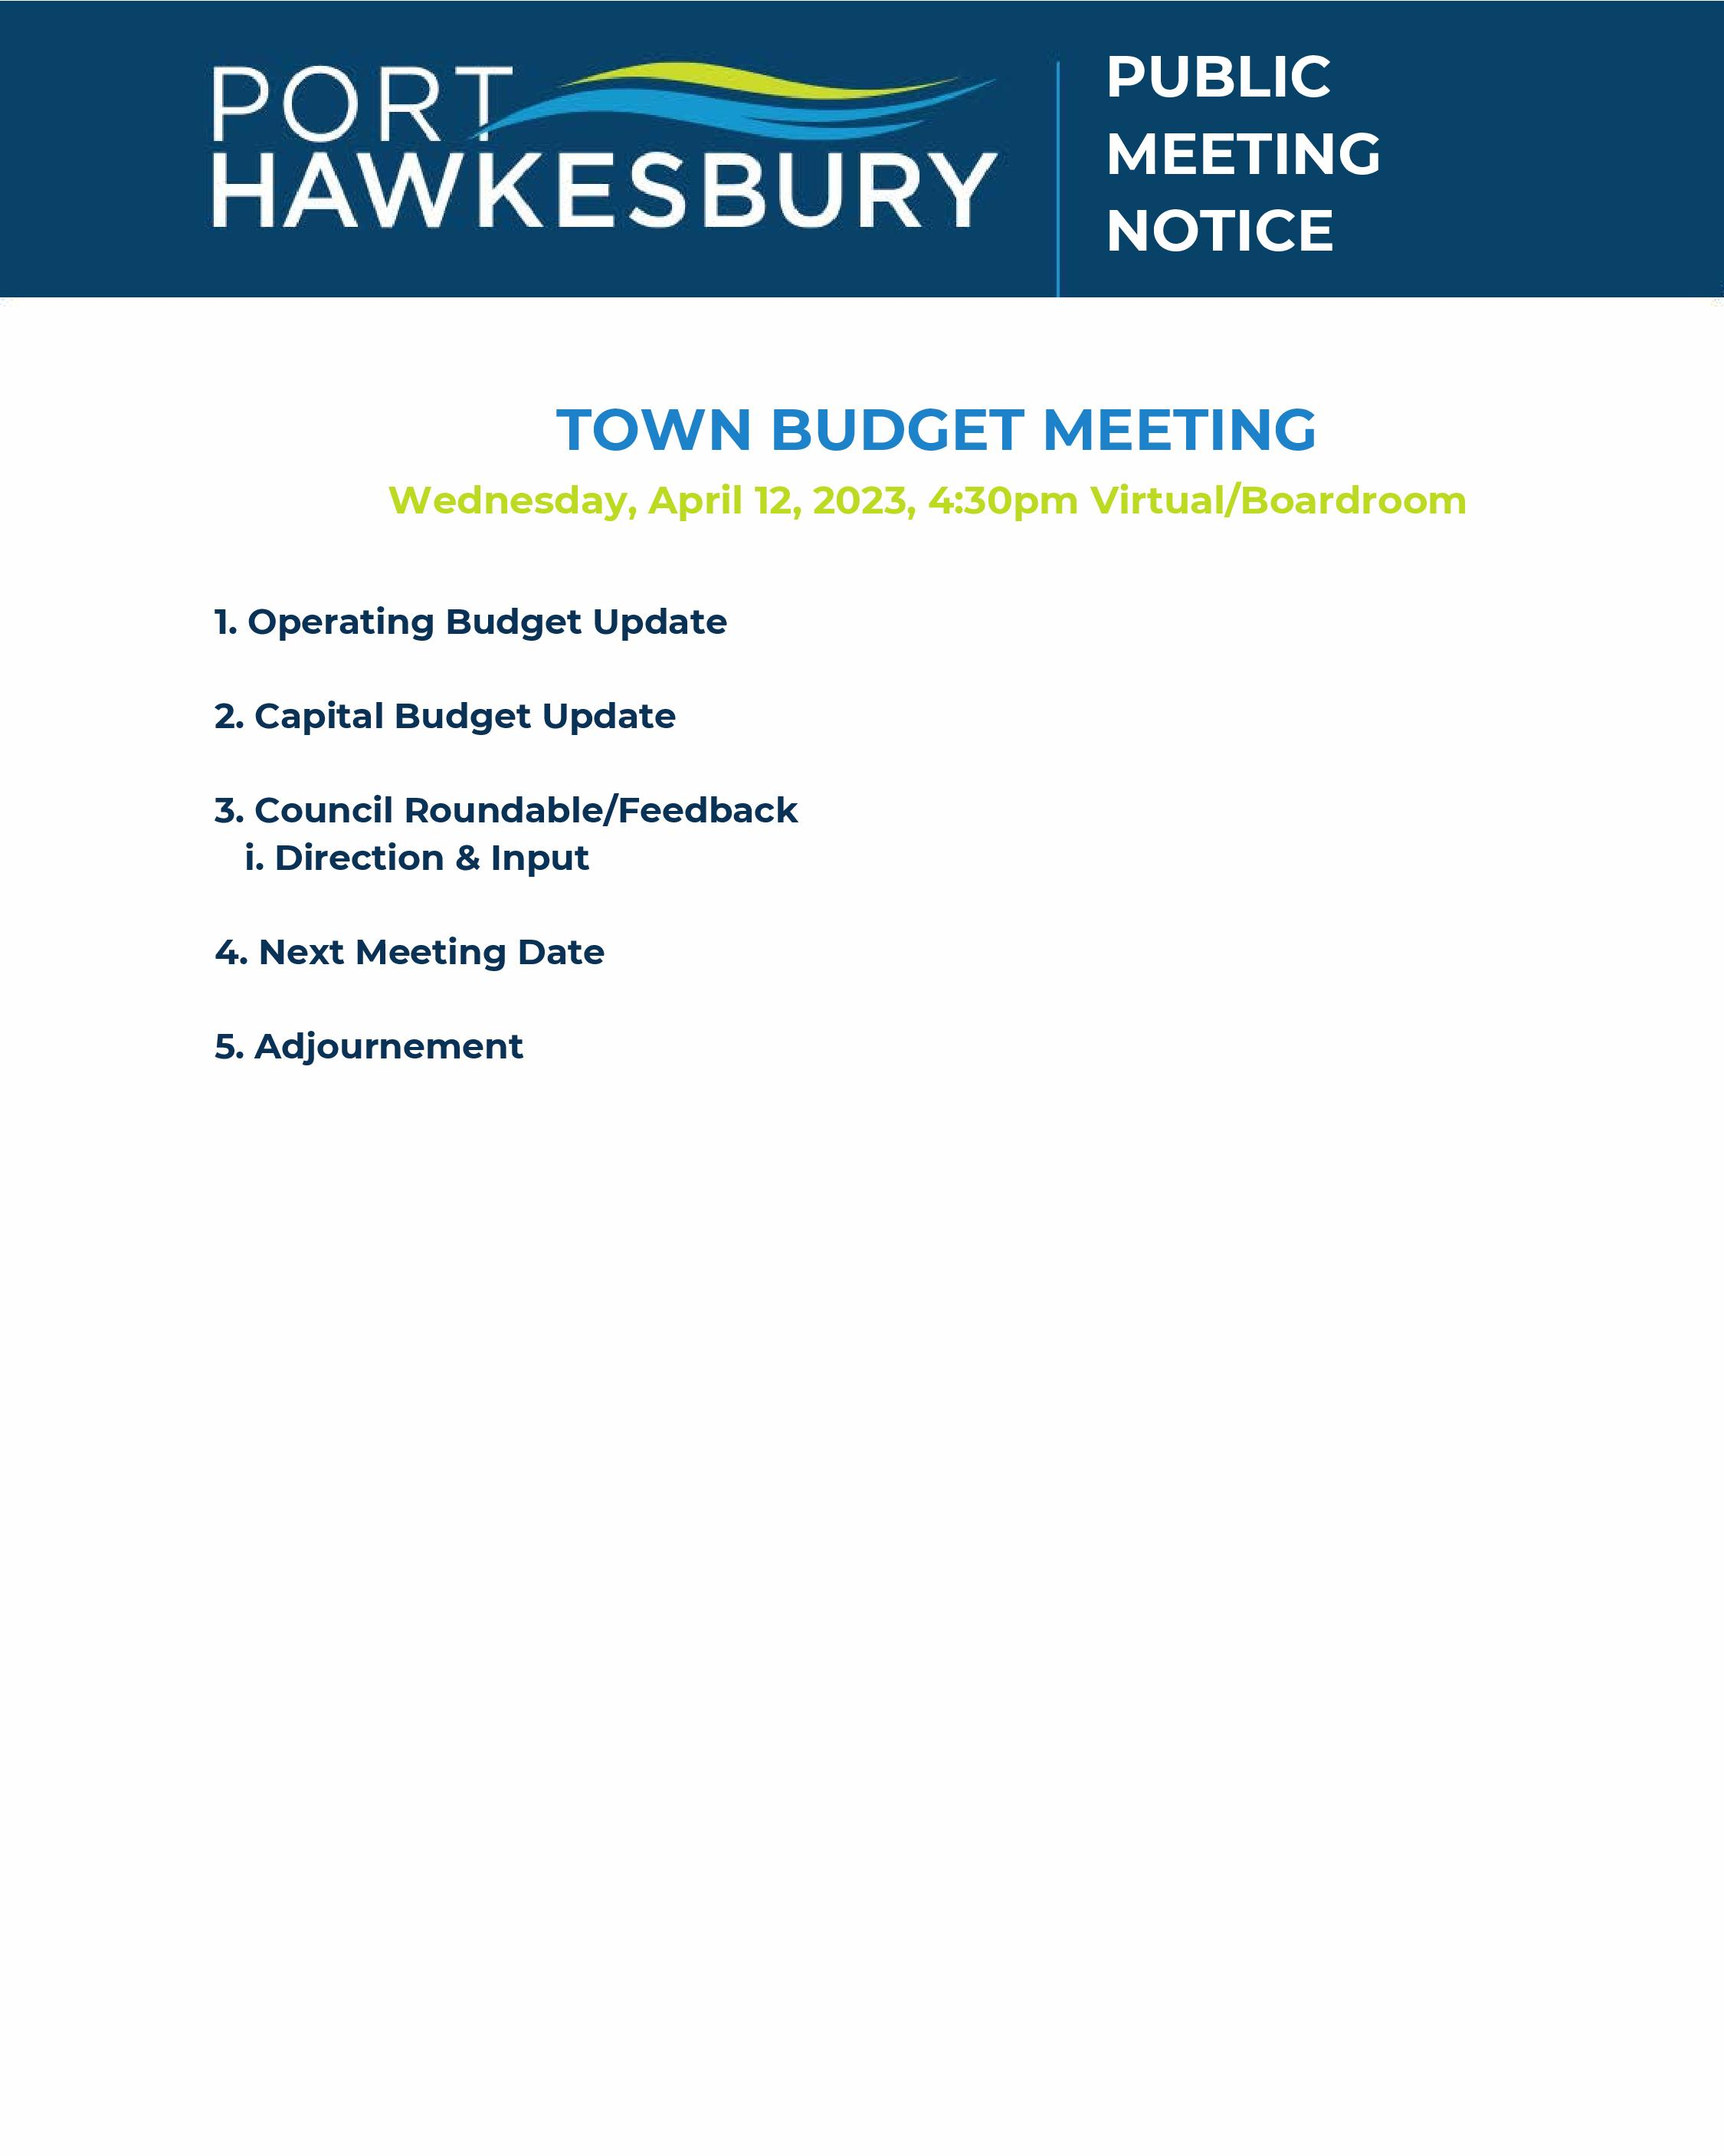 Budget Planning Meeting of Council – April 12, 2023